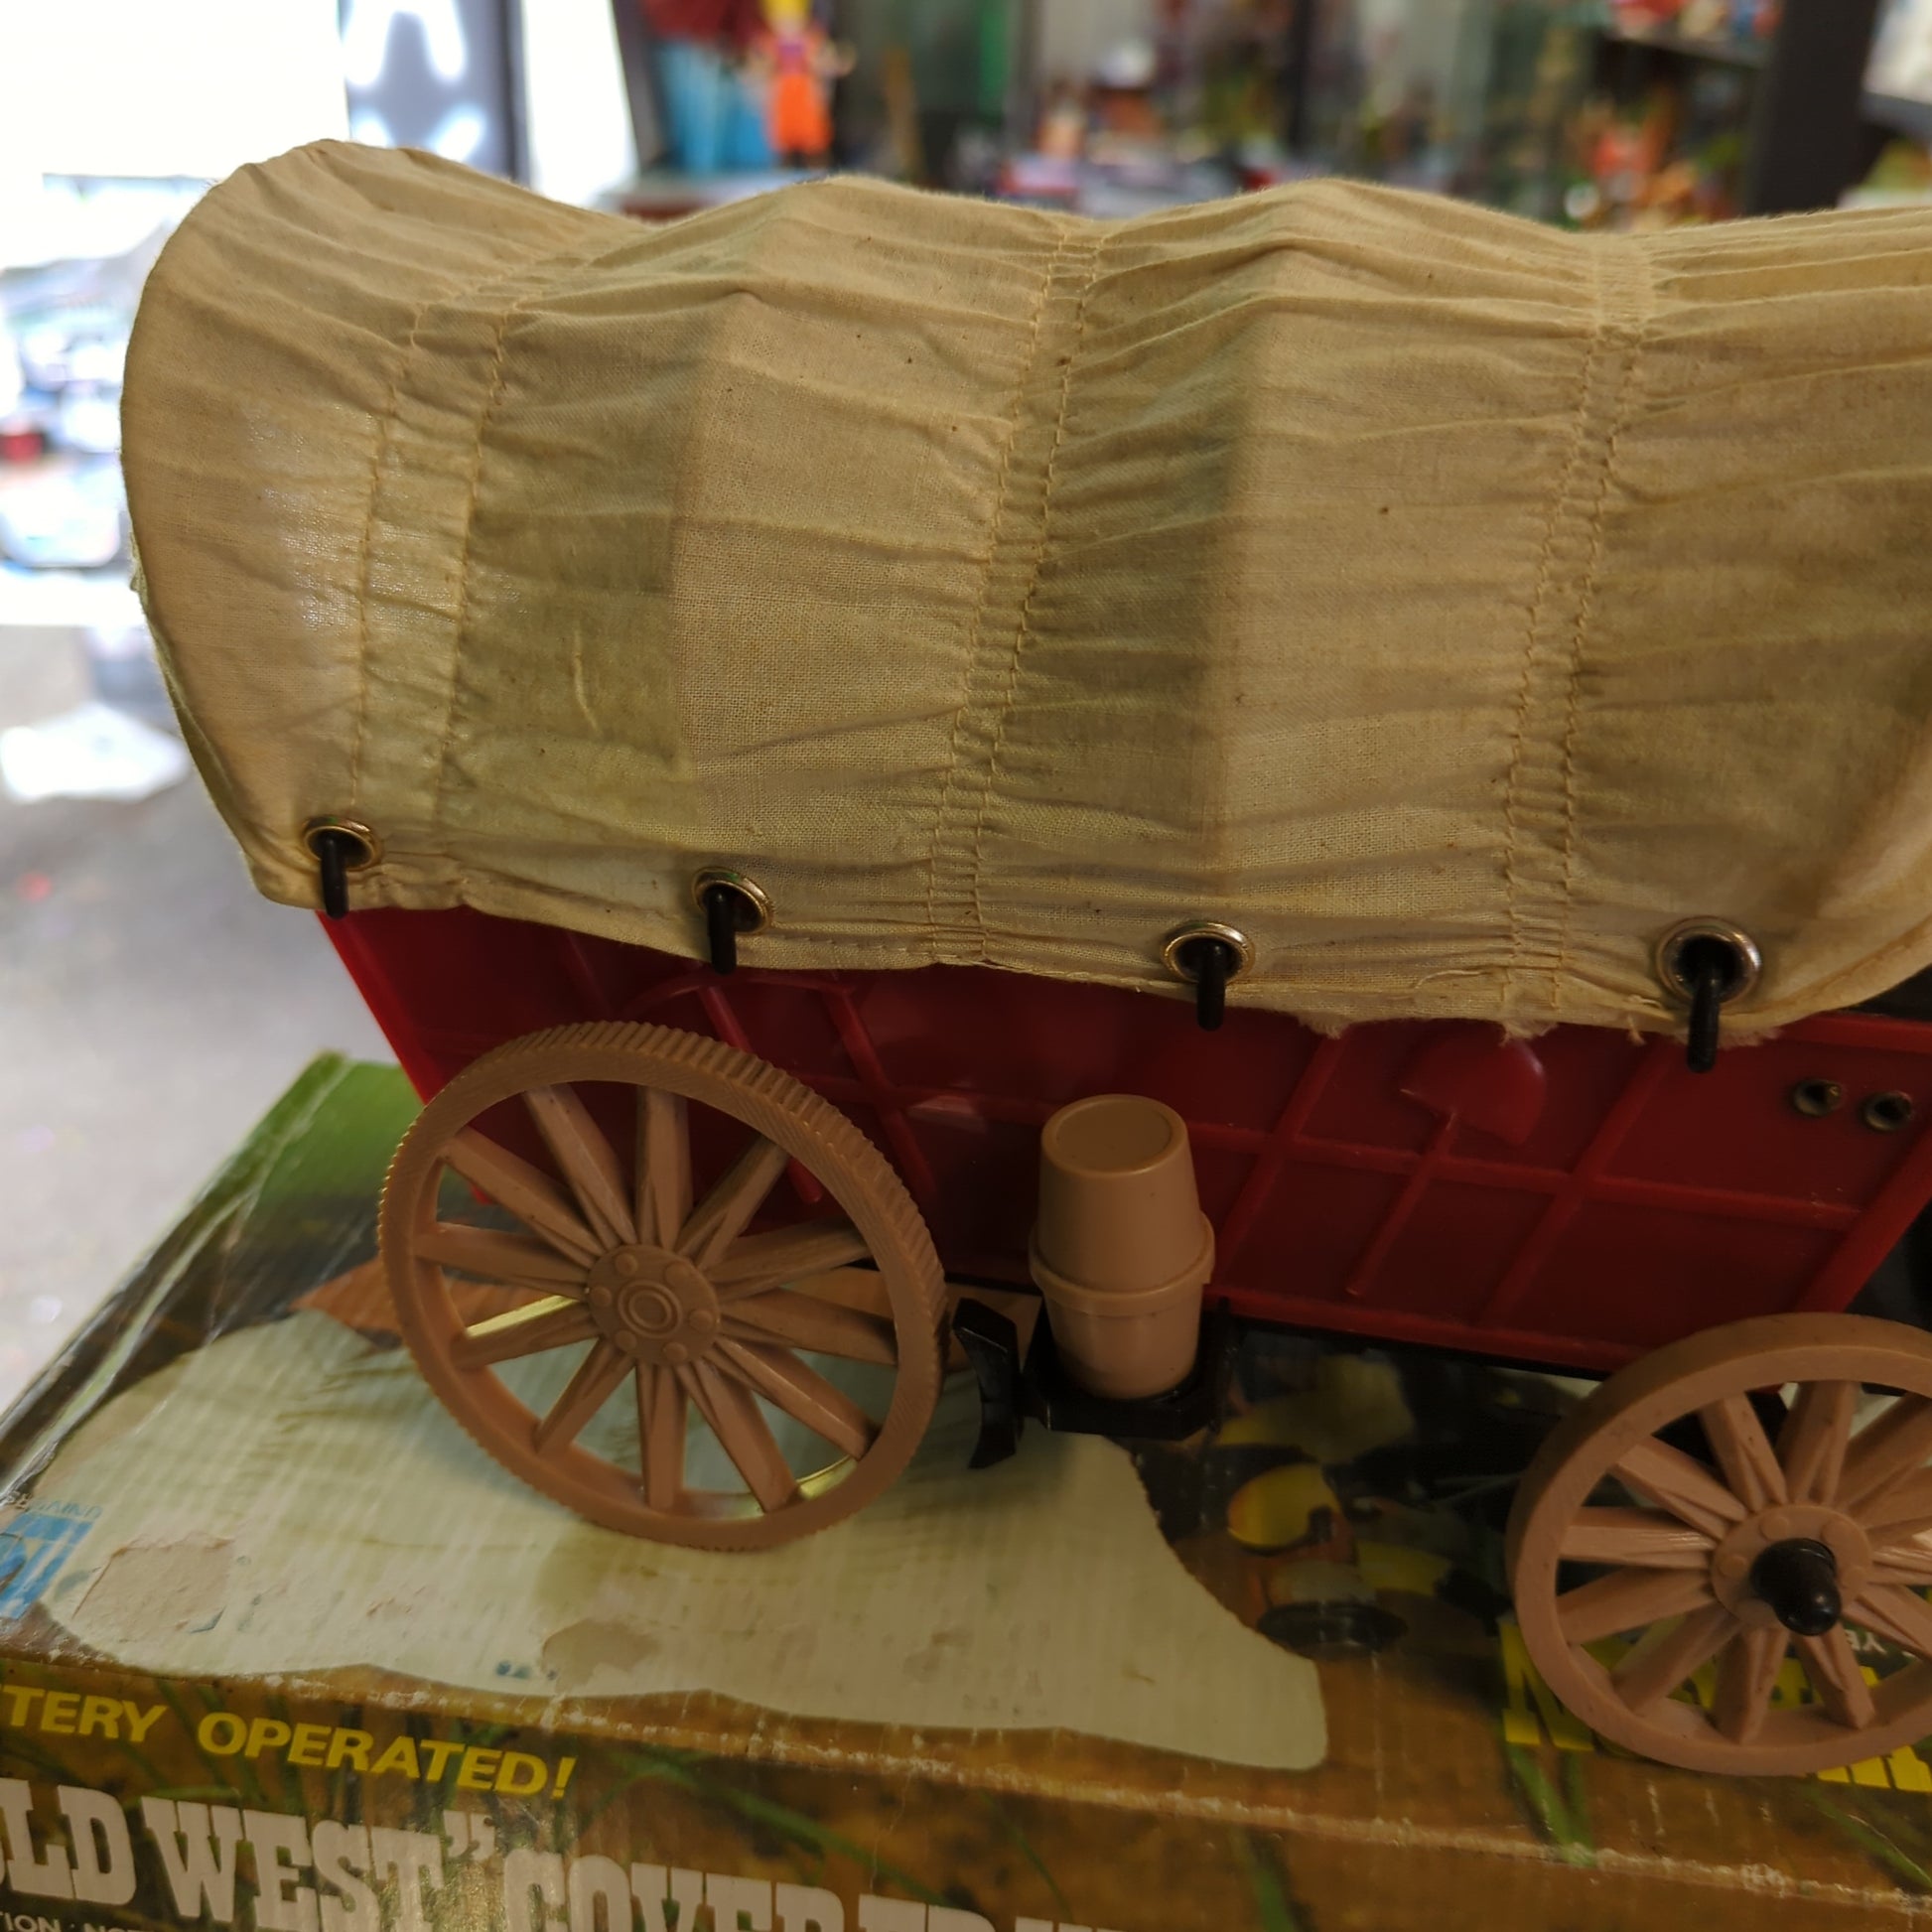 "OLD WEST" COVERED WAGON , WITH BOX FRENLY BRICKS - Open 7 Days